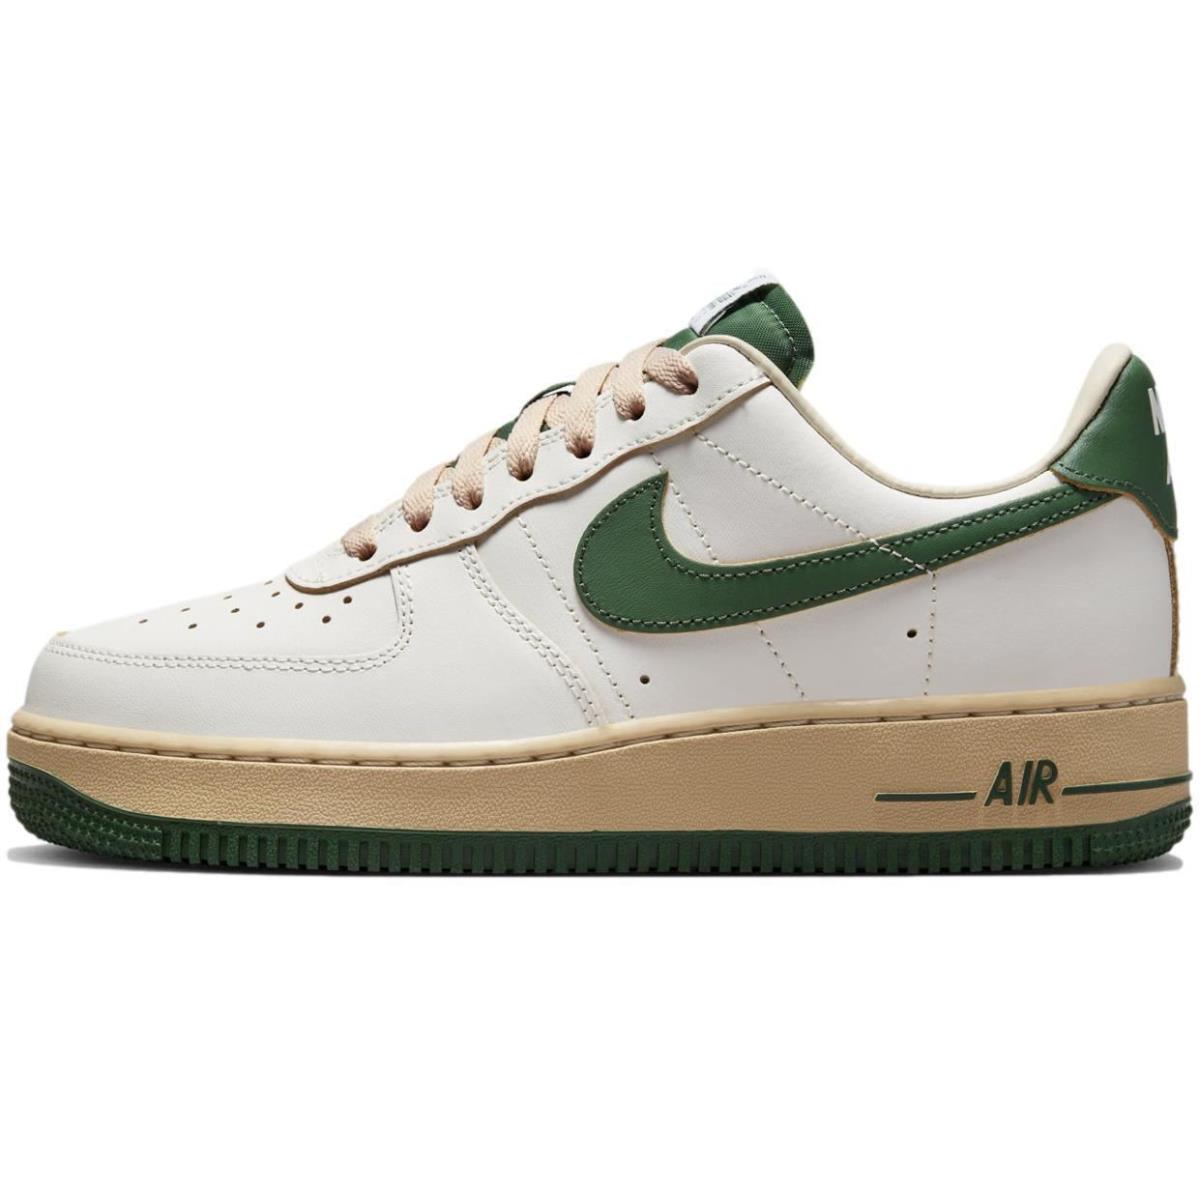 Nike Women`s Air Force 1 `07 LV8 `gorge Green` Shoes Sneakers DZ4764-133 - Sail/Gorge Green